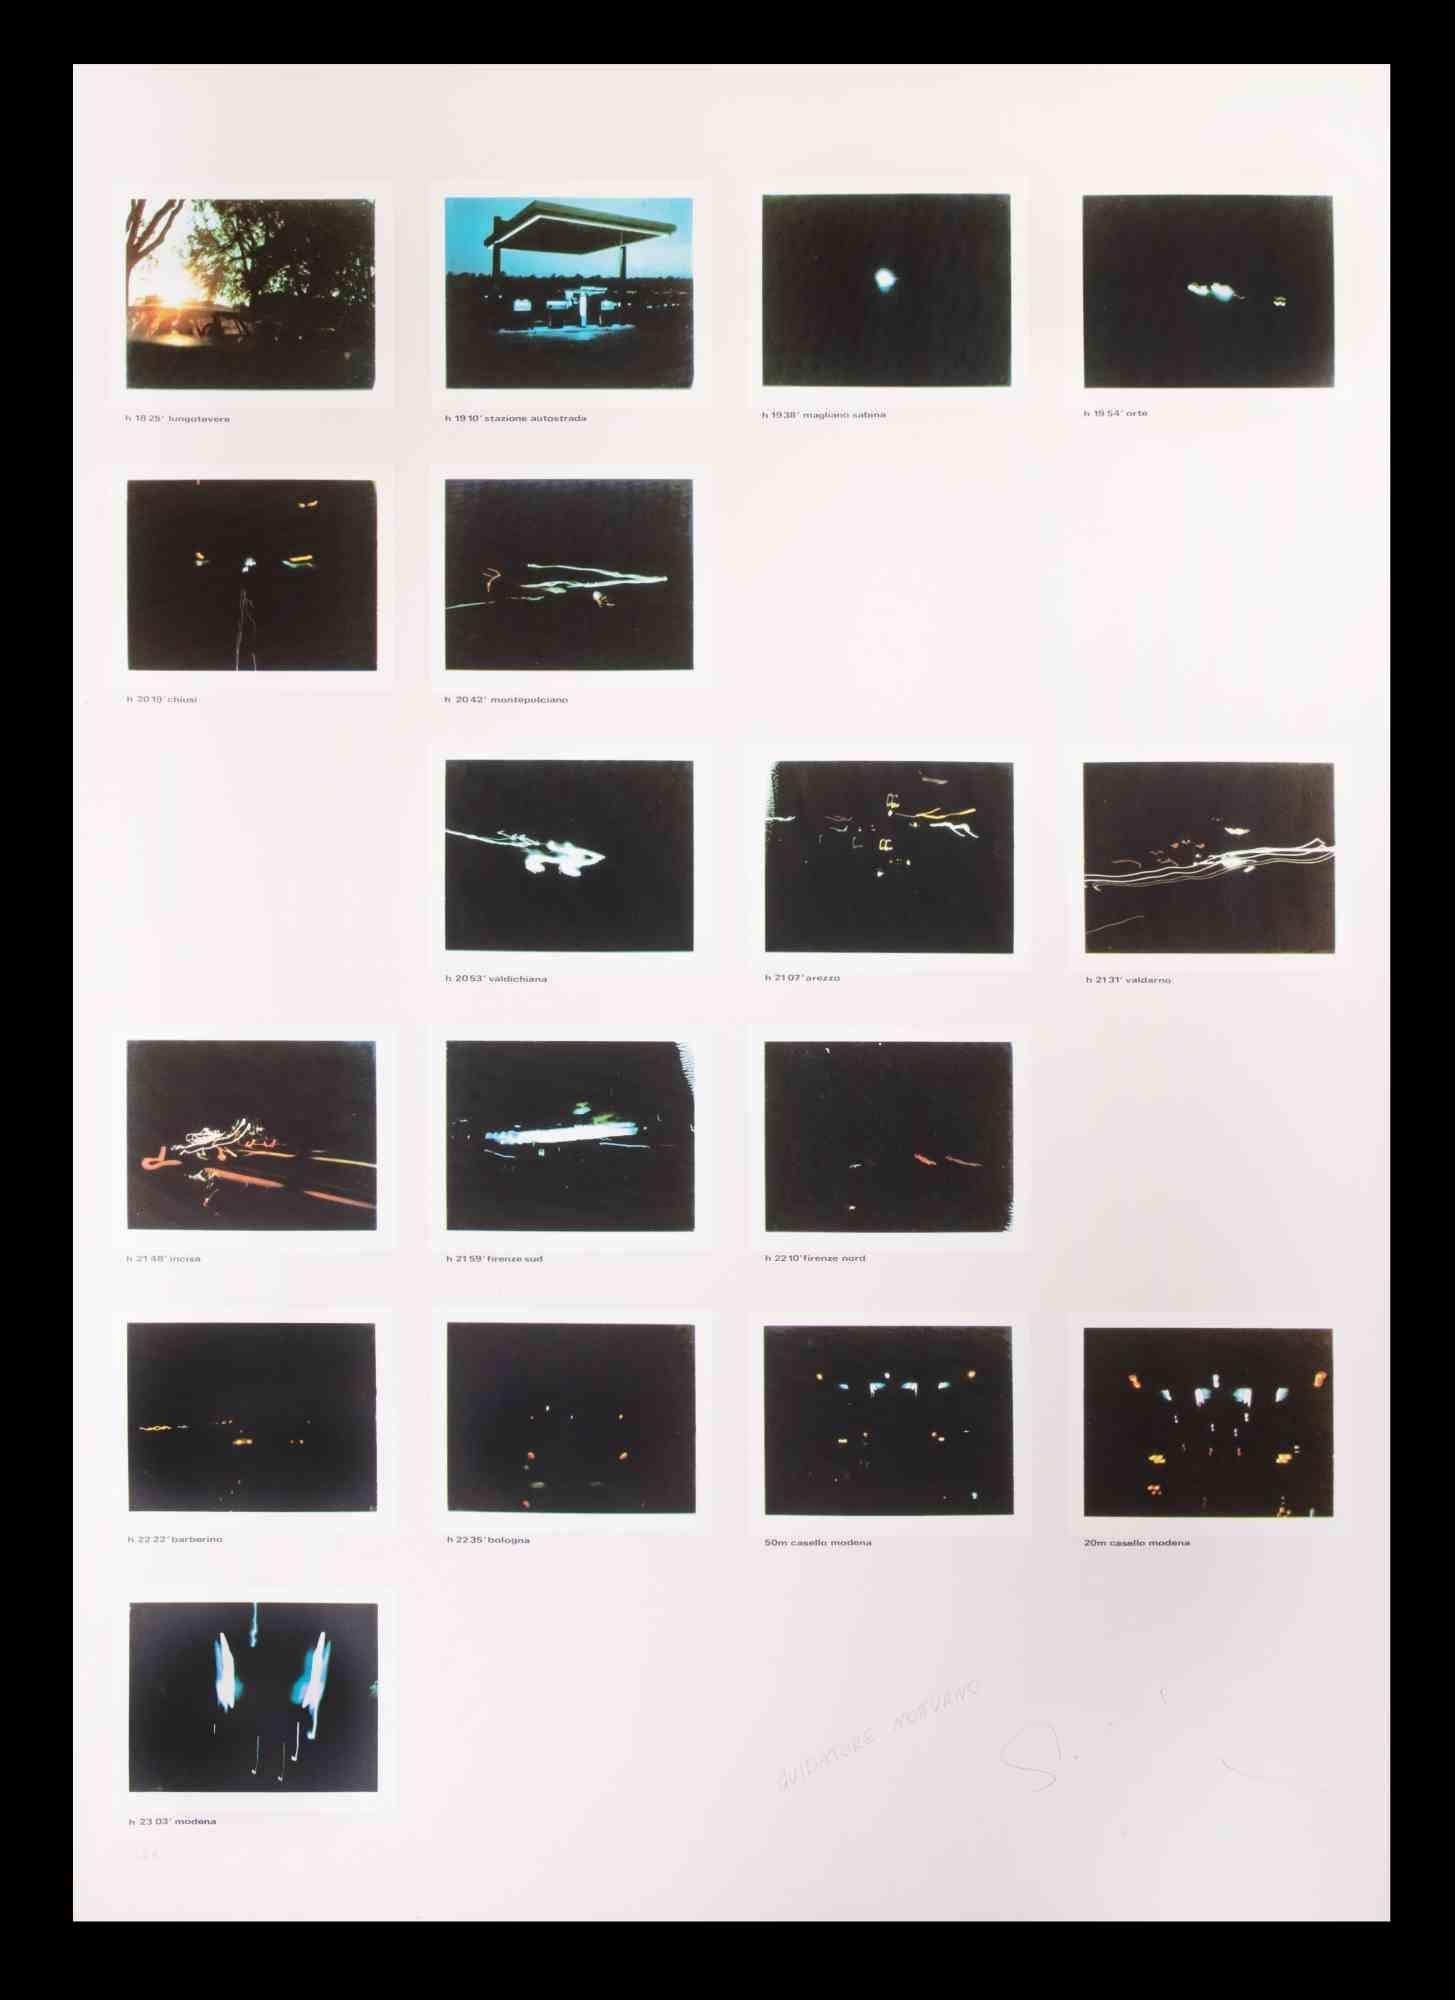 Night Driver is a contemporary artwork realized by Mario Schifano in the 1970s.

Hand-signed and titled on the lower margin.

Numbered on the lower margin. Edition 39/60

Good conditions.

The artwork represents 17 photographs in different places